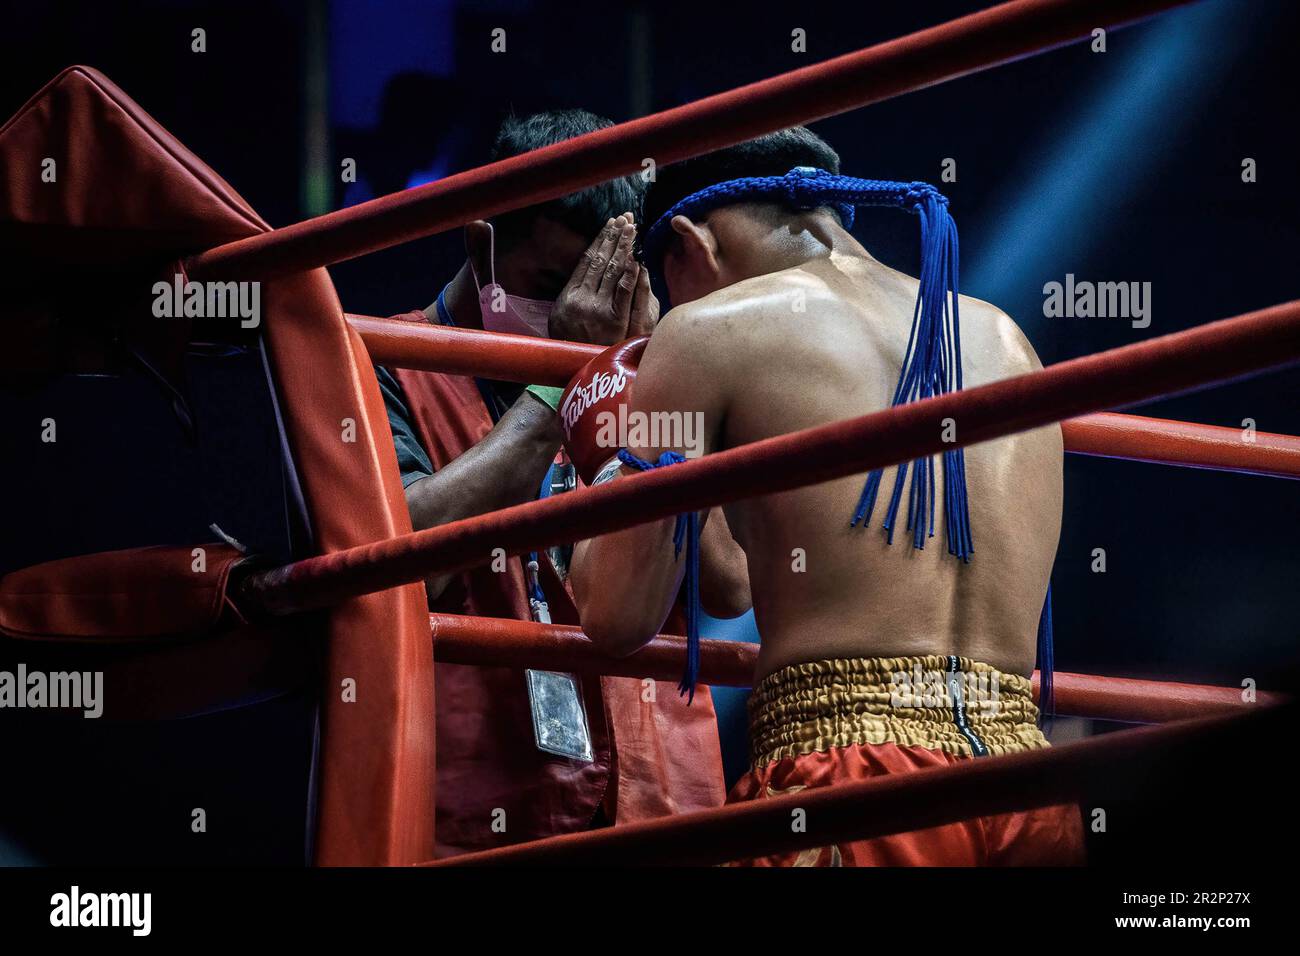 Bangkok, Thailand. 07th Nov, 2022. A Muay Thai boxer performs "Wai Kru" a ritual ceremony before engaging in battle which is a thank you and blessing to show deep respect to one's coaches, training partners, and family, at Bangkok's Rajadamnern stadium. Muay Thai fights at Thailand's iconic boxing Rajadamnern stadium, the dream stage for competitors and it is favourite for combat sports all over the world. (Photo by Nathalie Jamois/SOPA Images/Sipa USA) Credit: Sipa USA/Alamy Live News Stock Photo